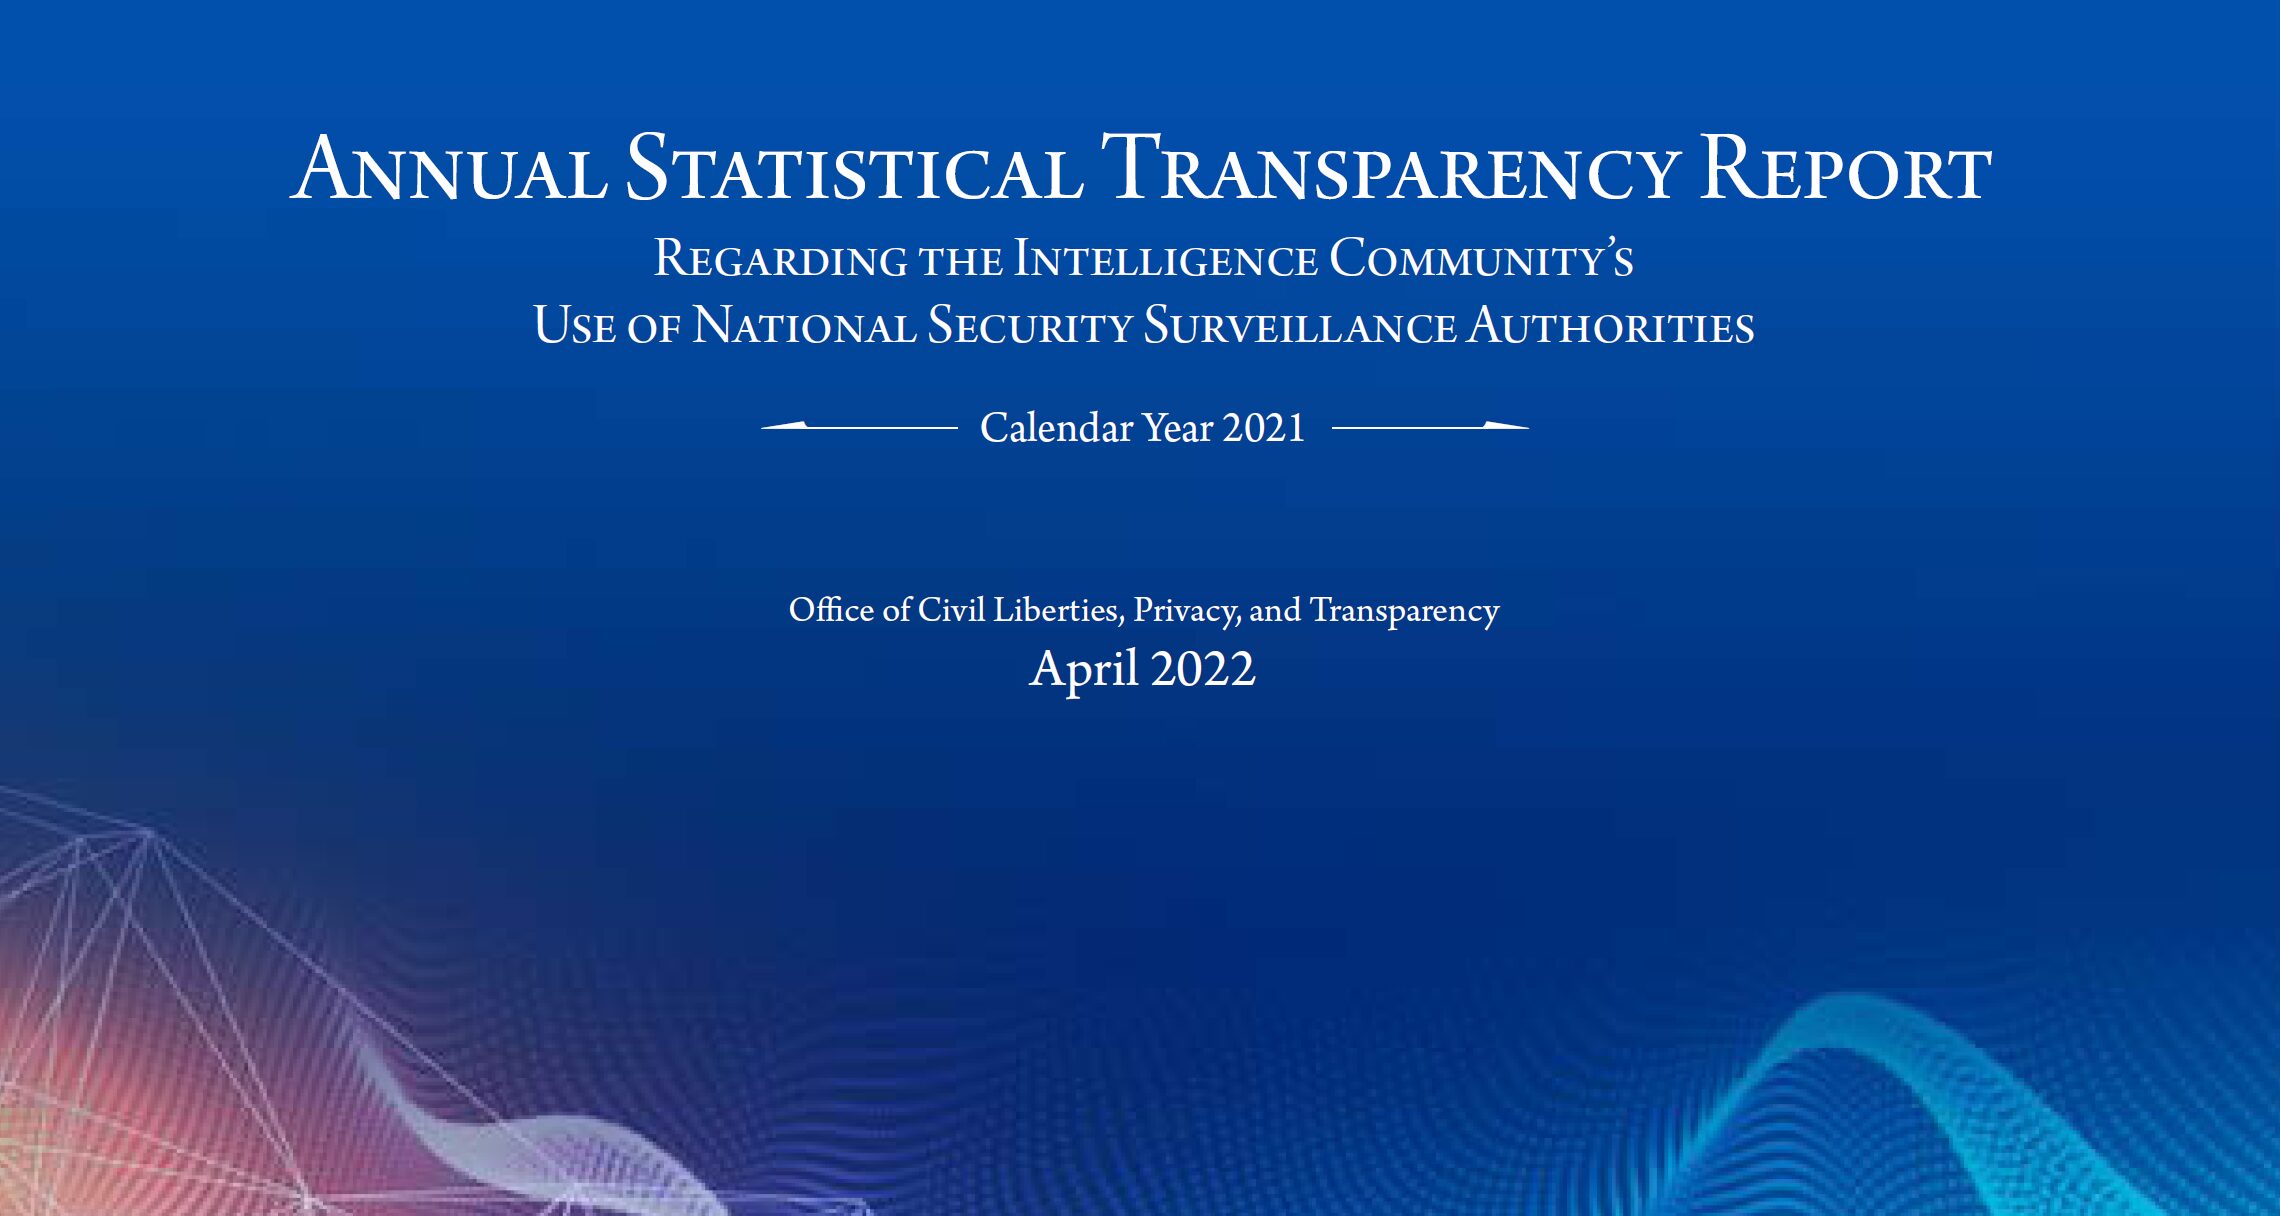 Annual Statistical Transparency Report Regarding the Intelligence Community’s Use of National Security Surveillance Authorities for 2021, Published April 2022